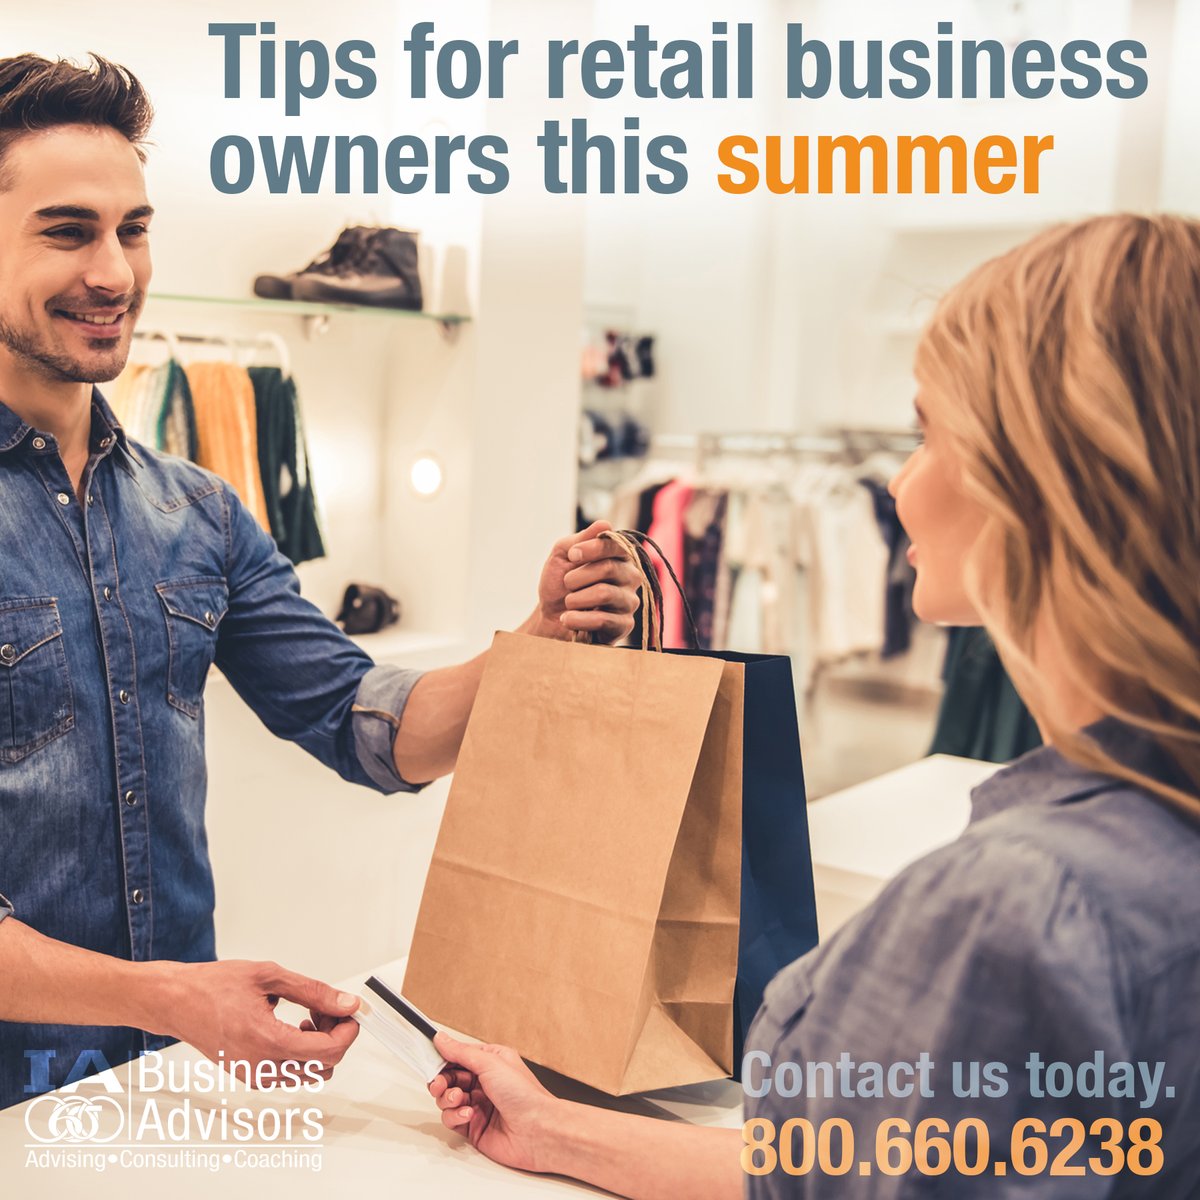 Summer is a time to get creative with your shop. Take fun pictures with your customers, add seasonal items like summer shoes and accessories, and fit the mood of the season with new decorations. 
#summer #retailtips #summersuccess #workmode #business #contactus